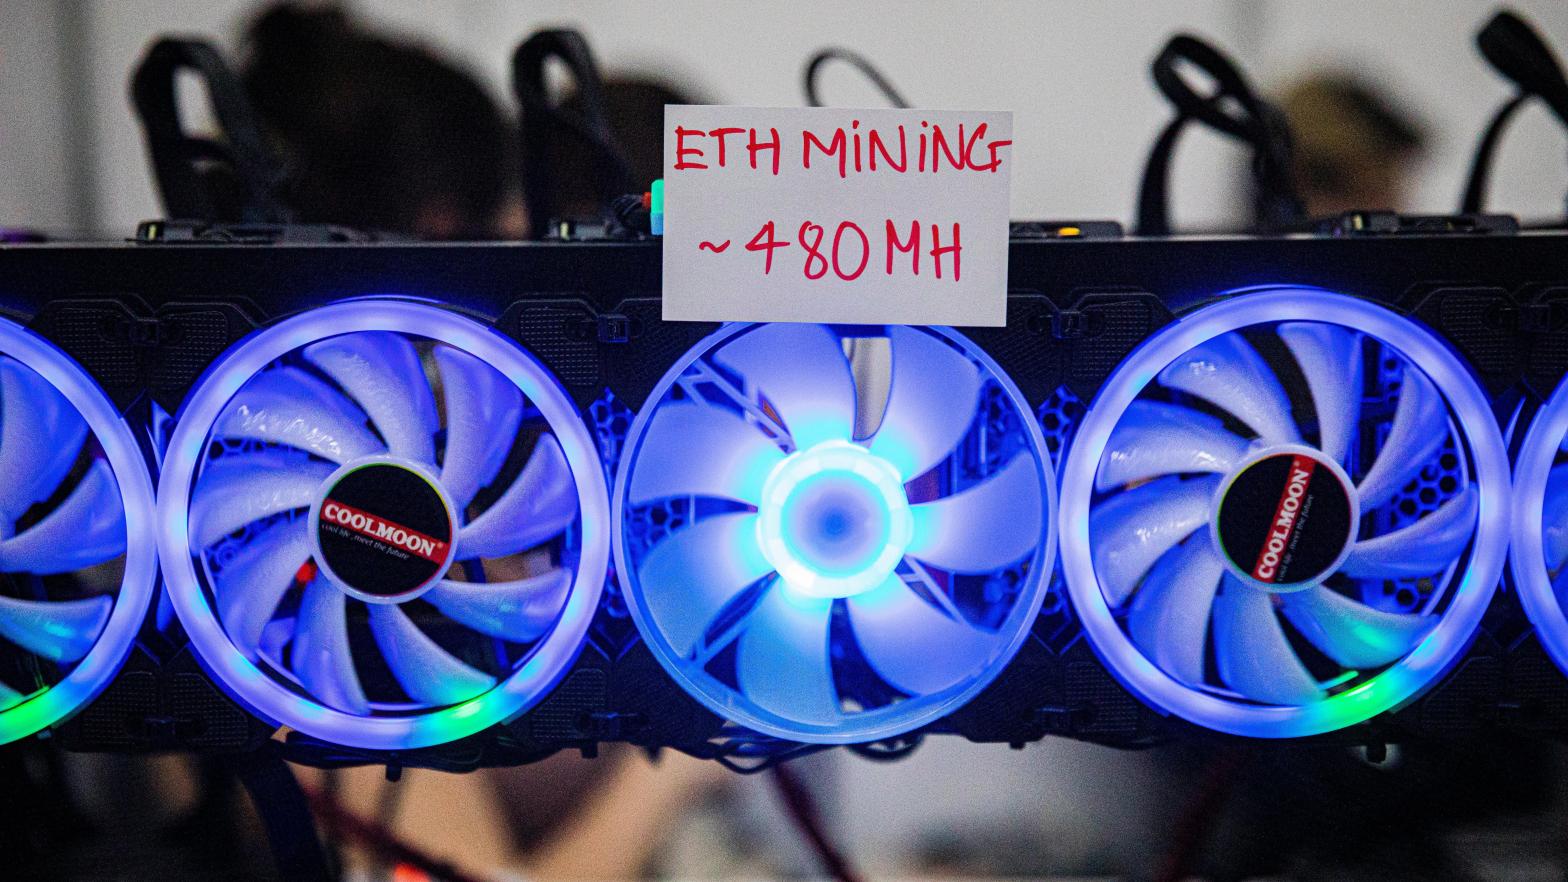 A machine for mining ether on display at a crypto convention in Thailand. (Photo: Lauren DeCicca, Getty Images)